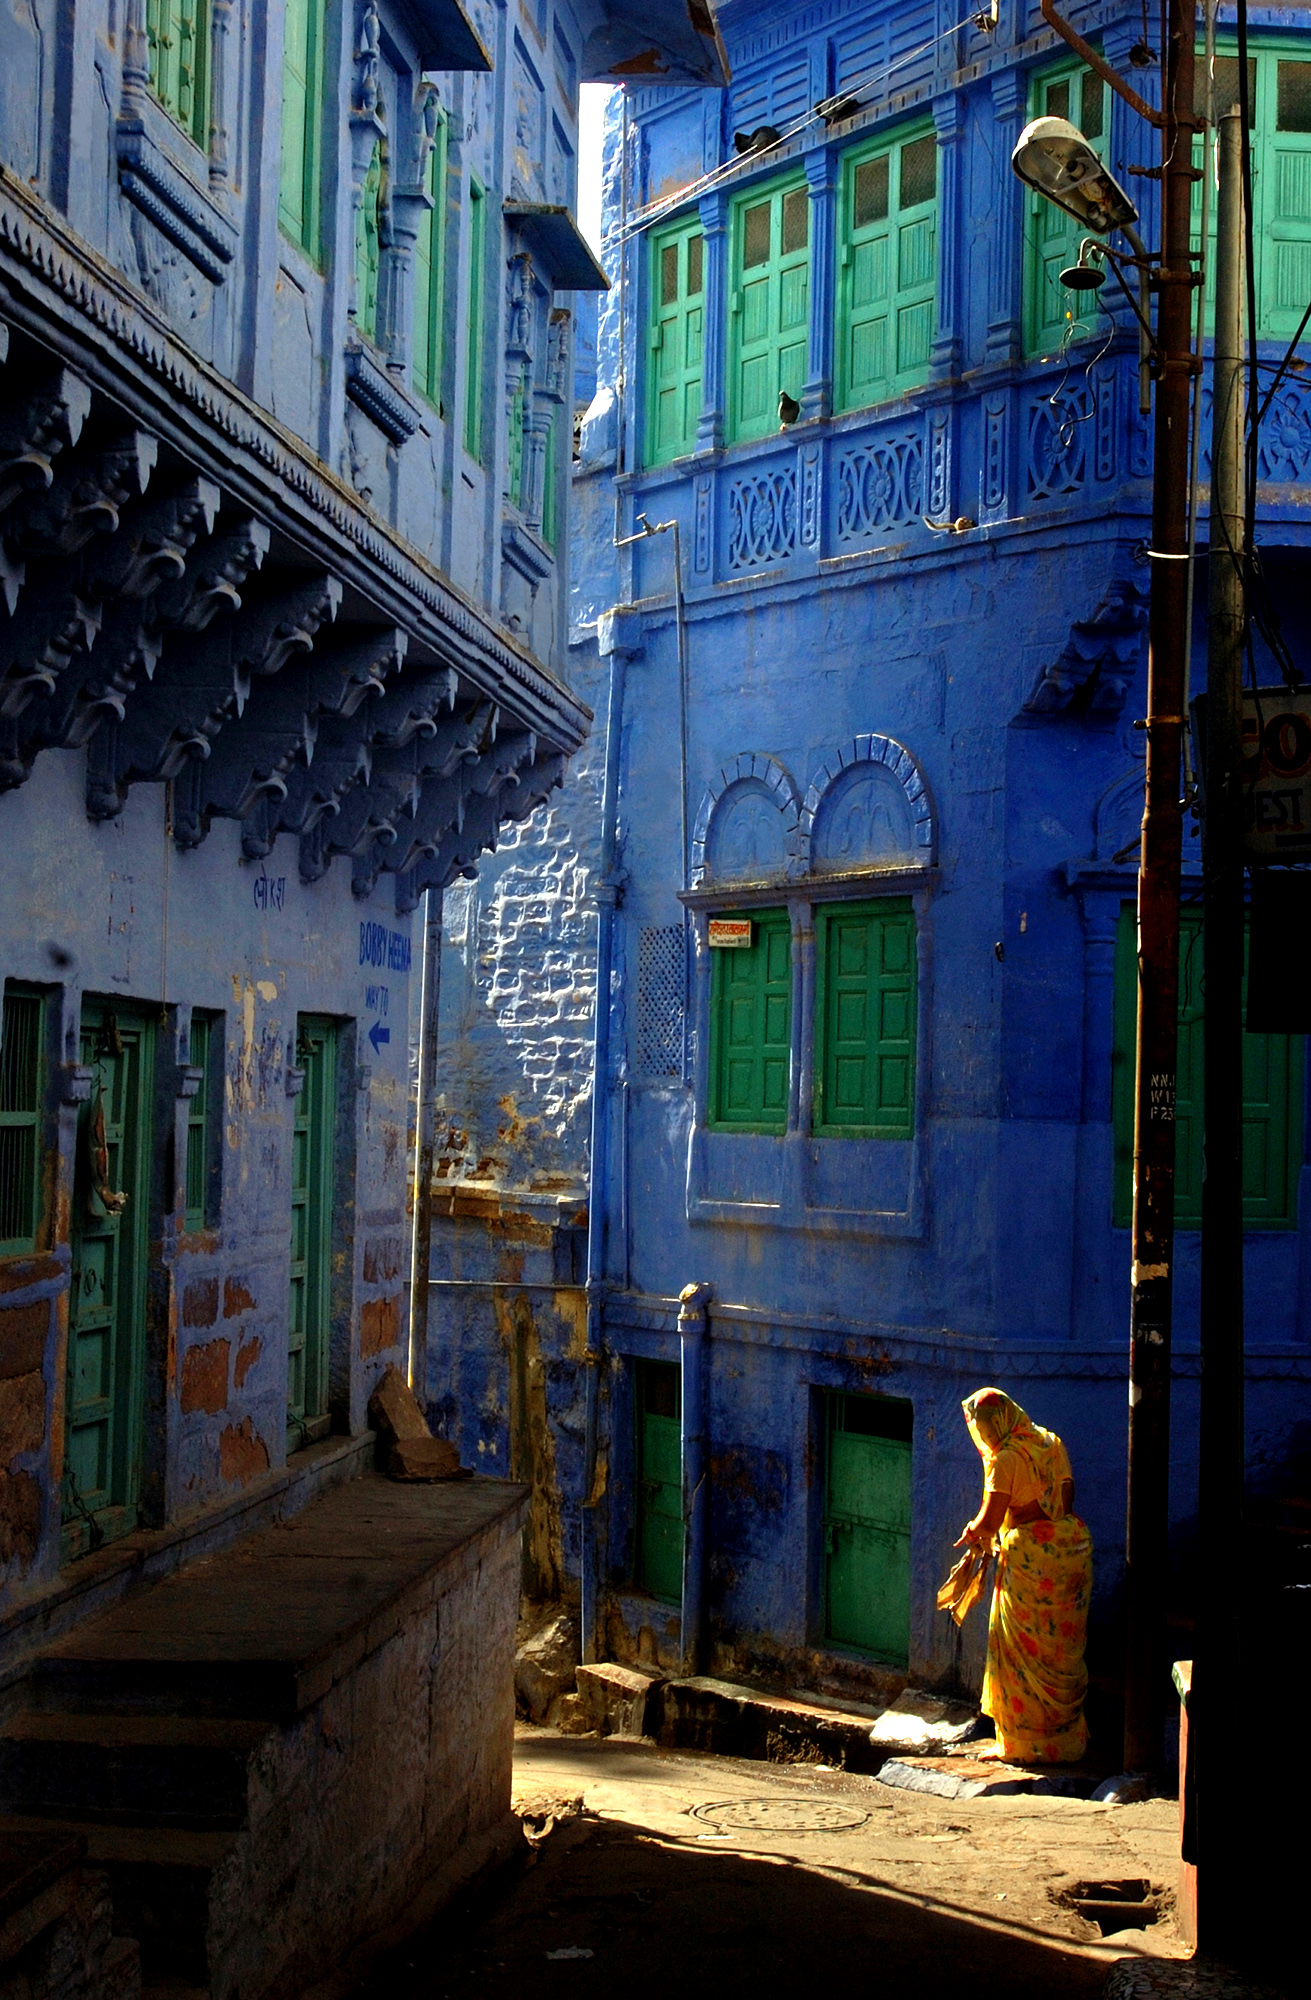 Cities prosaic termites were the main reason behind the colour Blue. This army was causing widespread structural damage in the settlement. To contain the menace, the houses were painted by adding chemicals such as copper sulphate to standard whitewash.